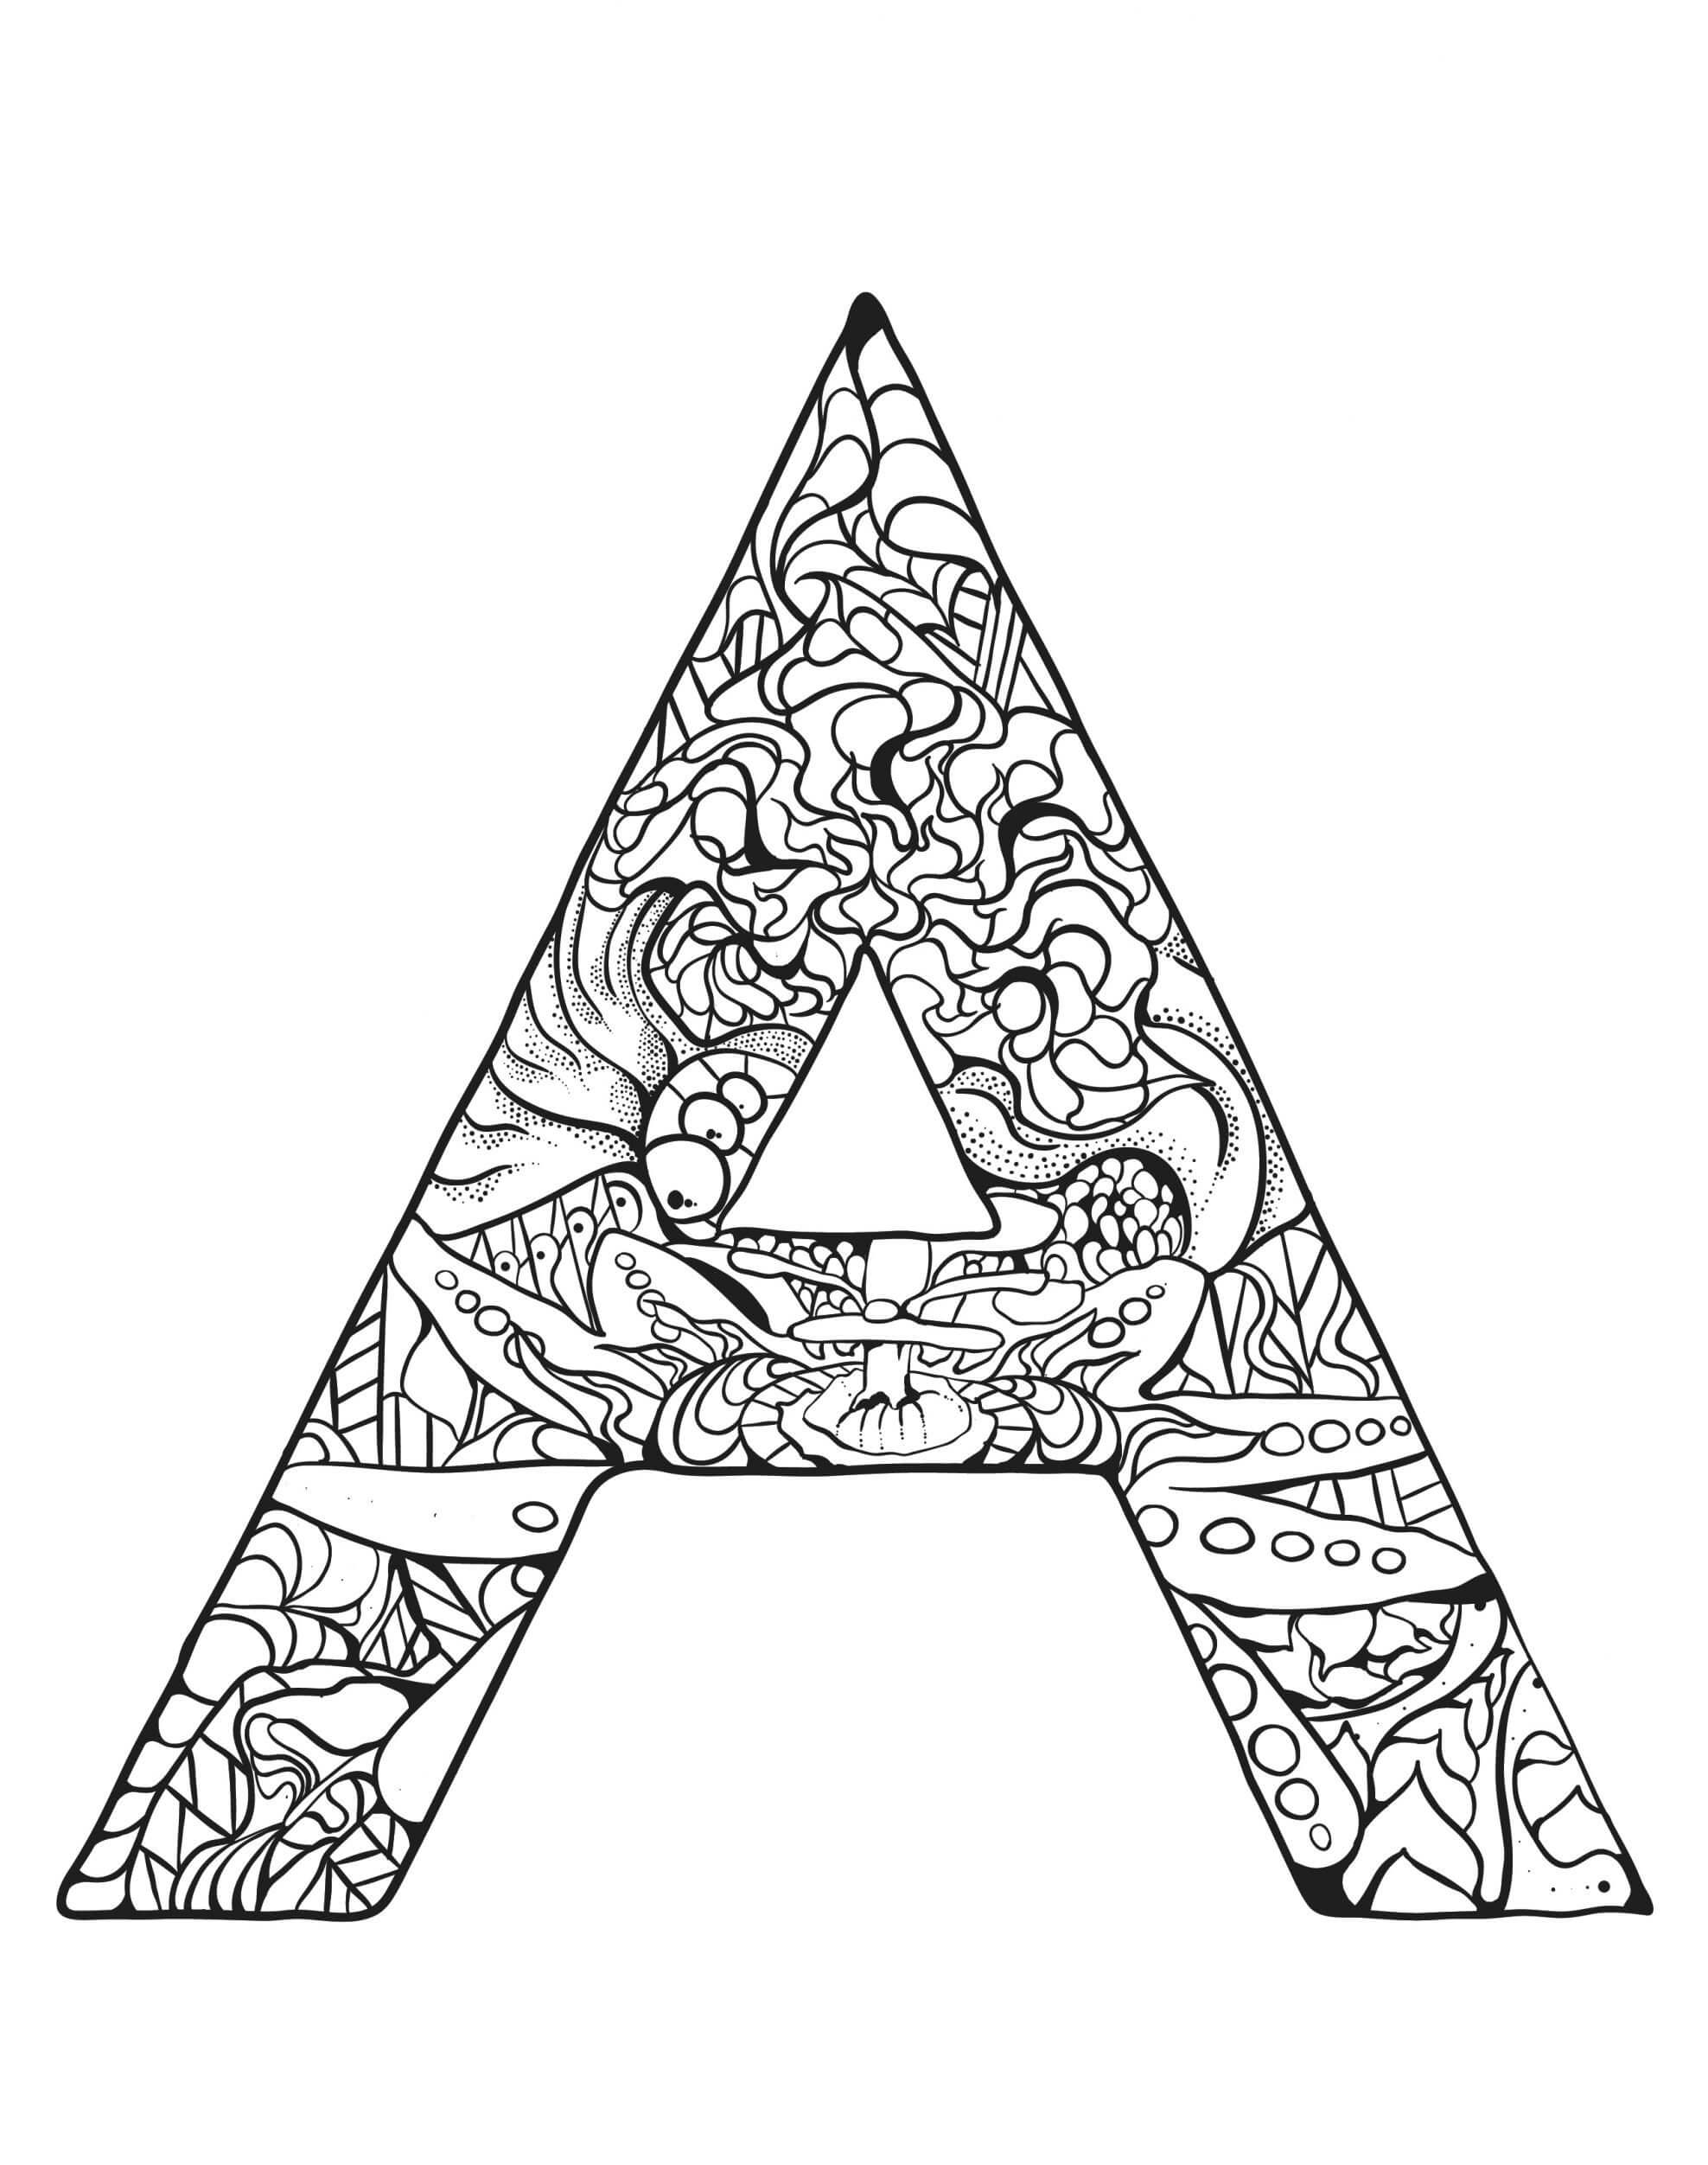 Mandala Letter E Coloring Page - Download, Print Now!